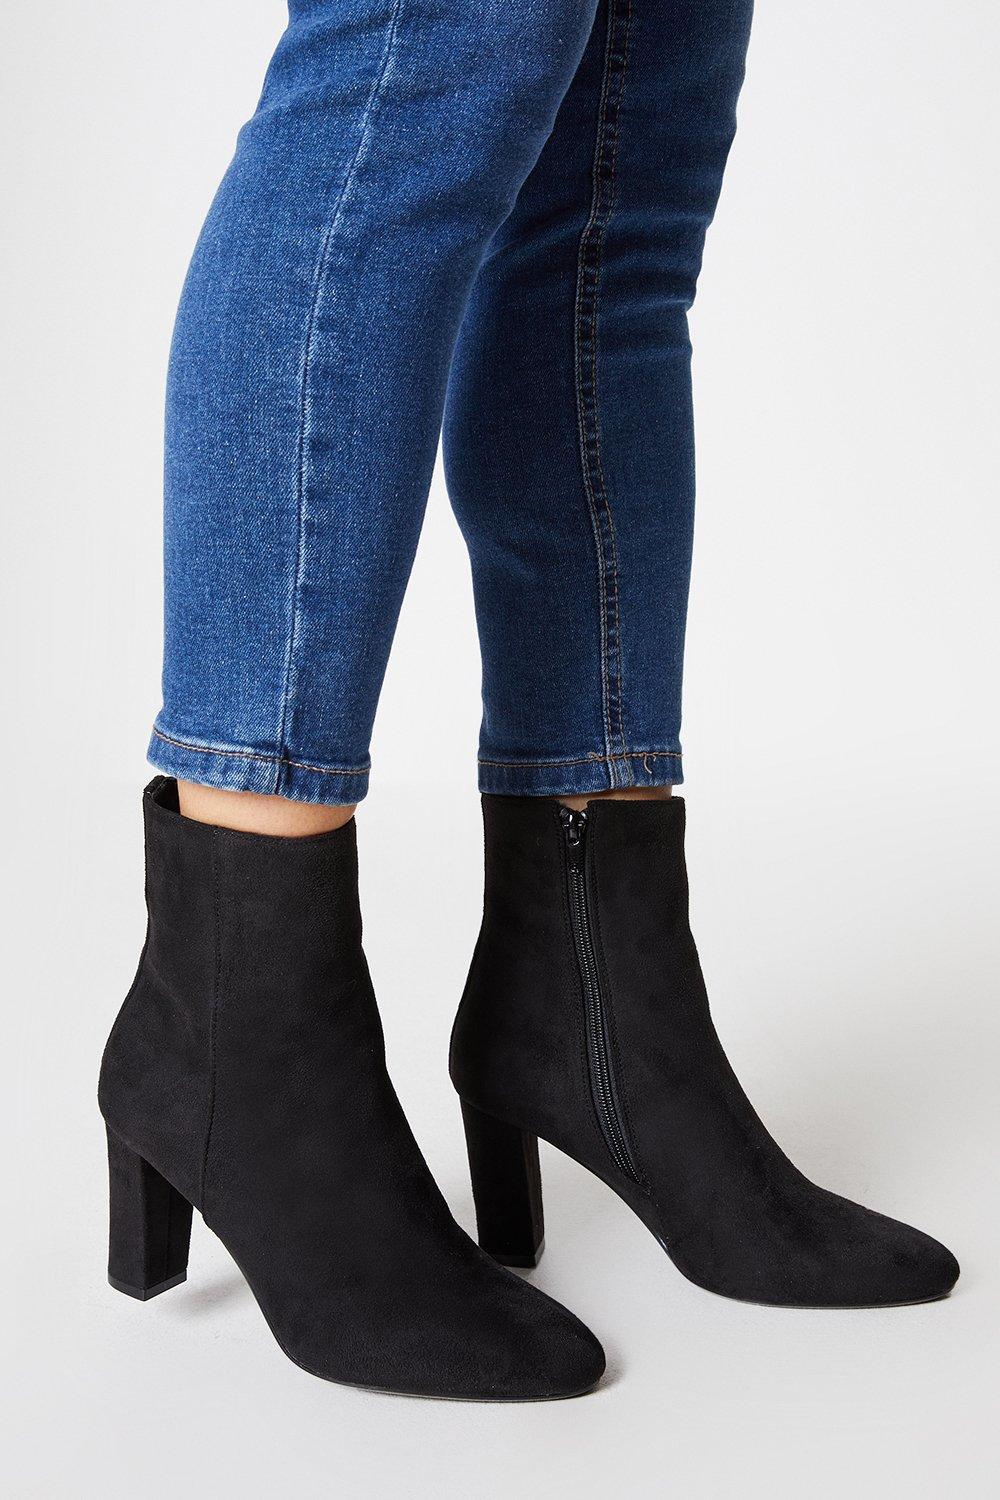 Image of Womens Principles: Olsen Almond Toe High Block Heel Ankle Boots